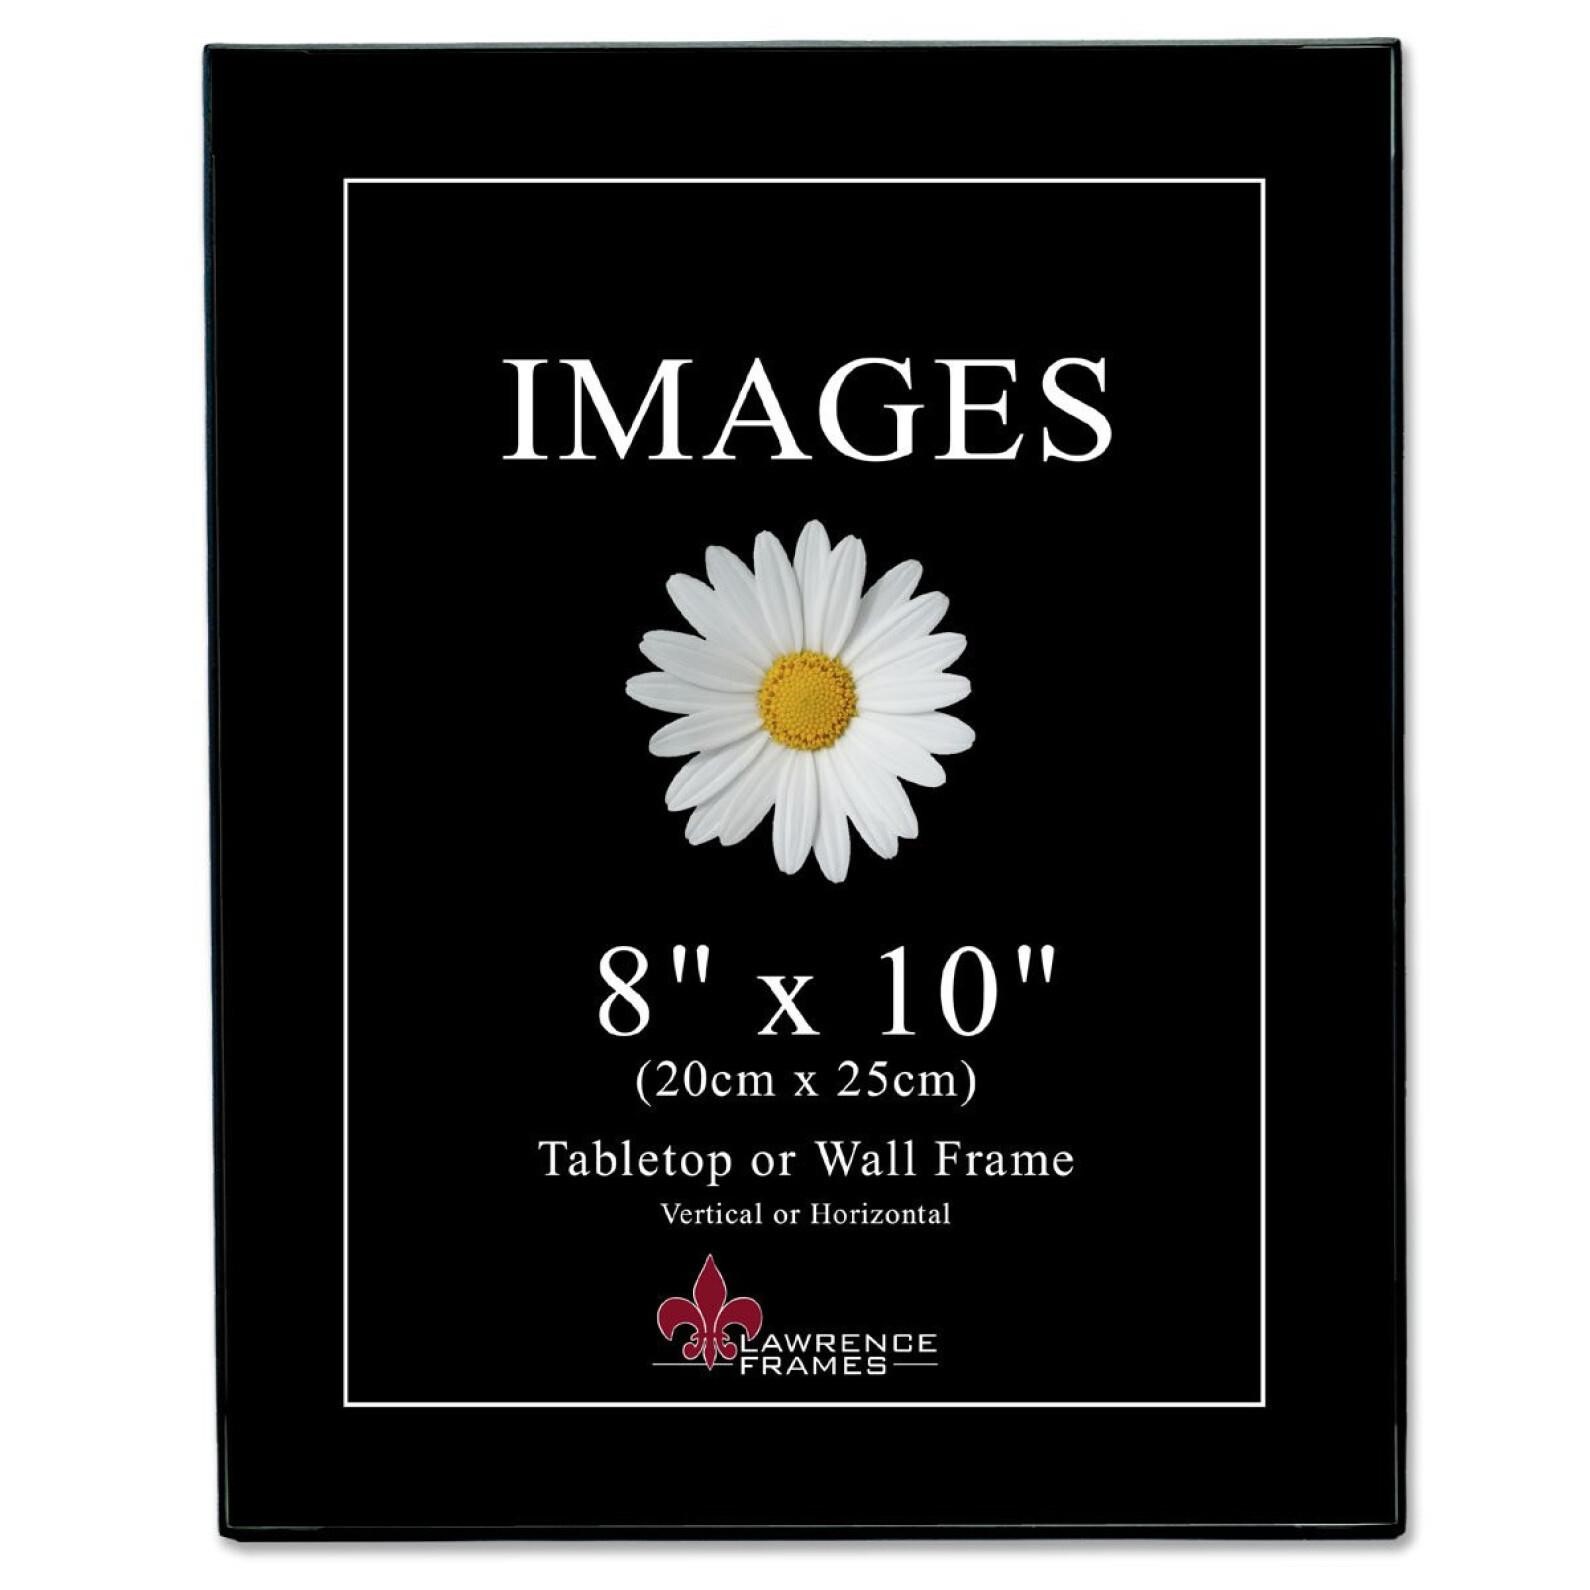 Lawrence Frames Images Collection 8 x 10 Black Pla